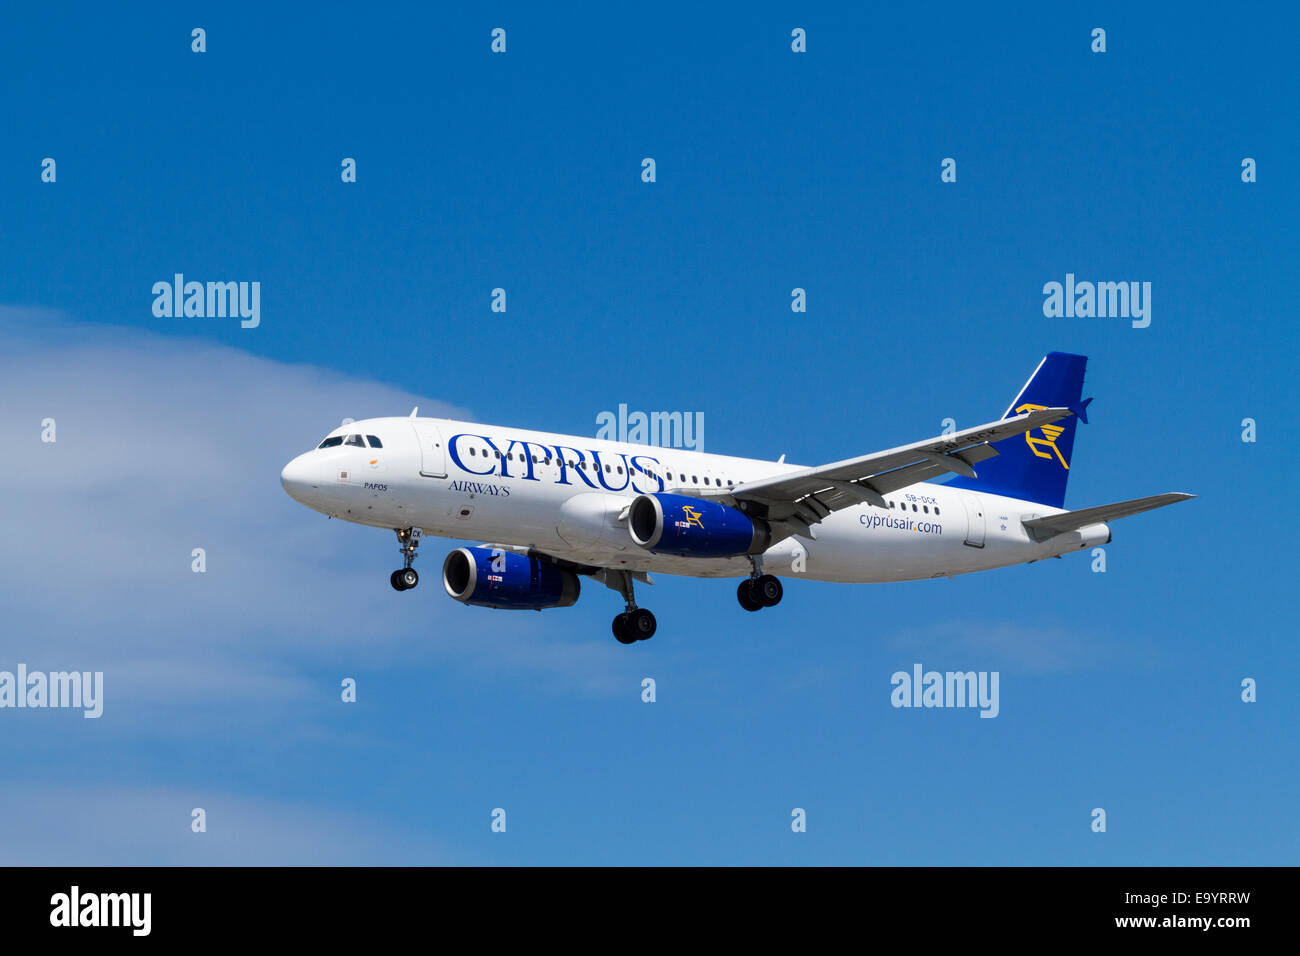 Cyprus Airways Airbus A320-200 plane, 5B-DCK, named Pafos, on its approach for landing at London Heathrow, England, UK, Stock Photo